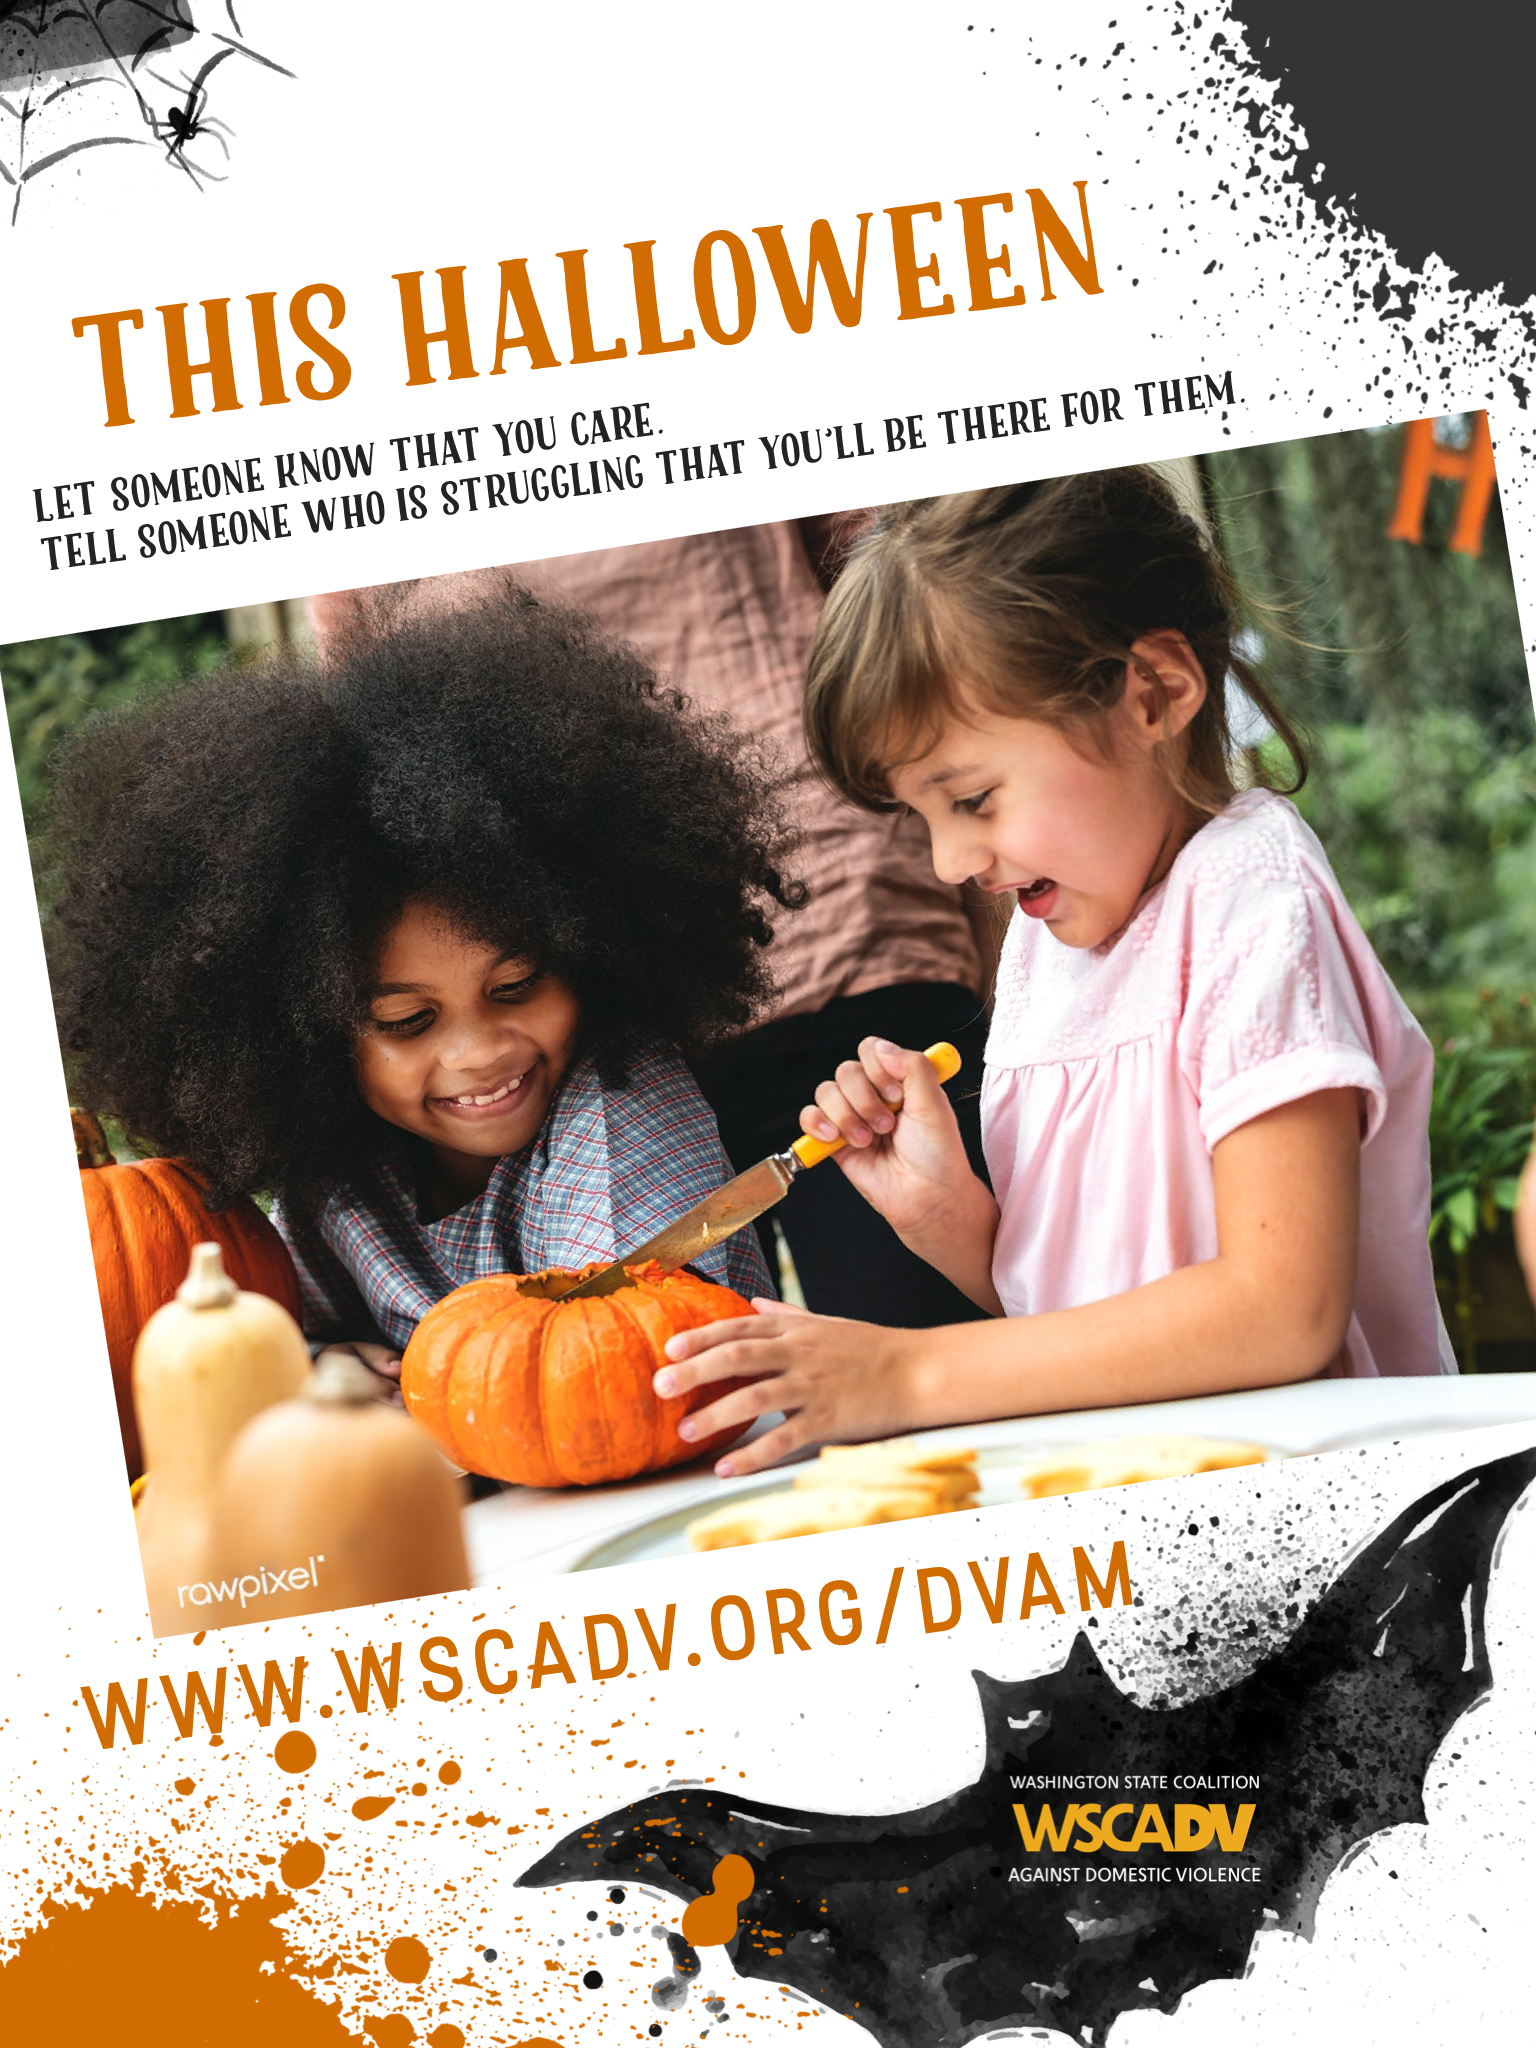 Halloween themed image for Domestic Violence Action Month. There is a photo of two children smiling as they carve pumpkins. Above the photo is text that reads: This Halloween, let someone know that you care. Tell someone who is struggling that you'll be there for them.. Underneath the photo is a bat and the url www.wscadv.org/dvam